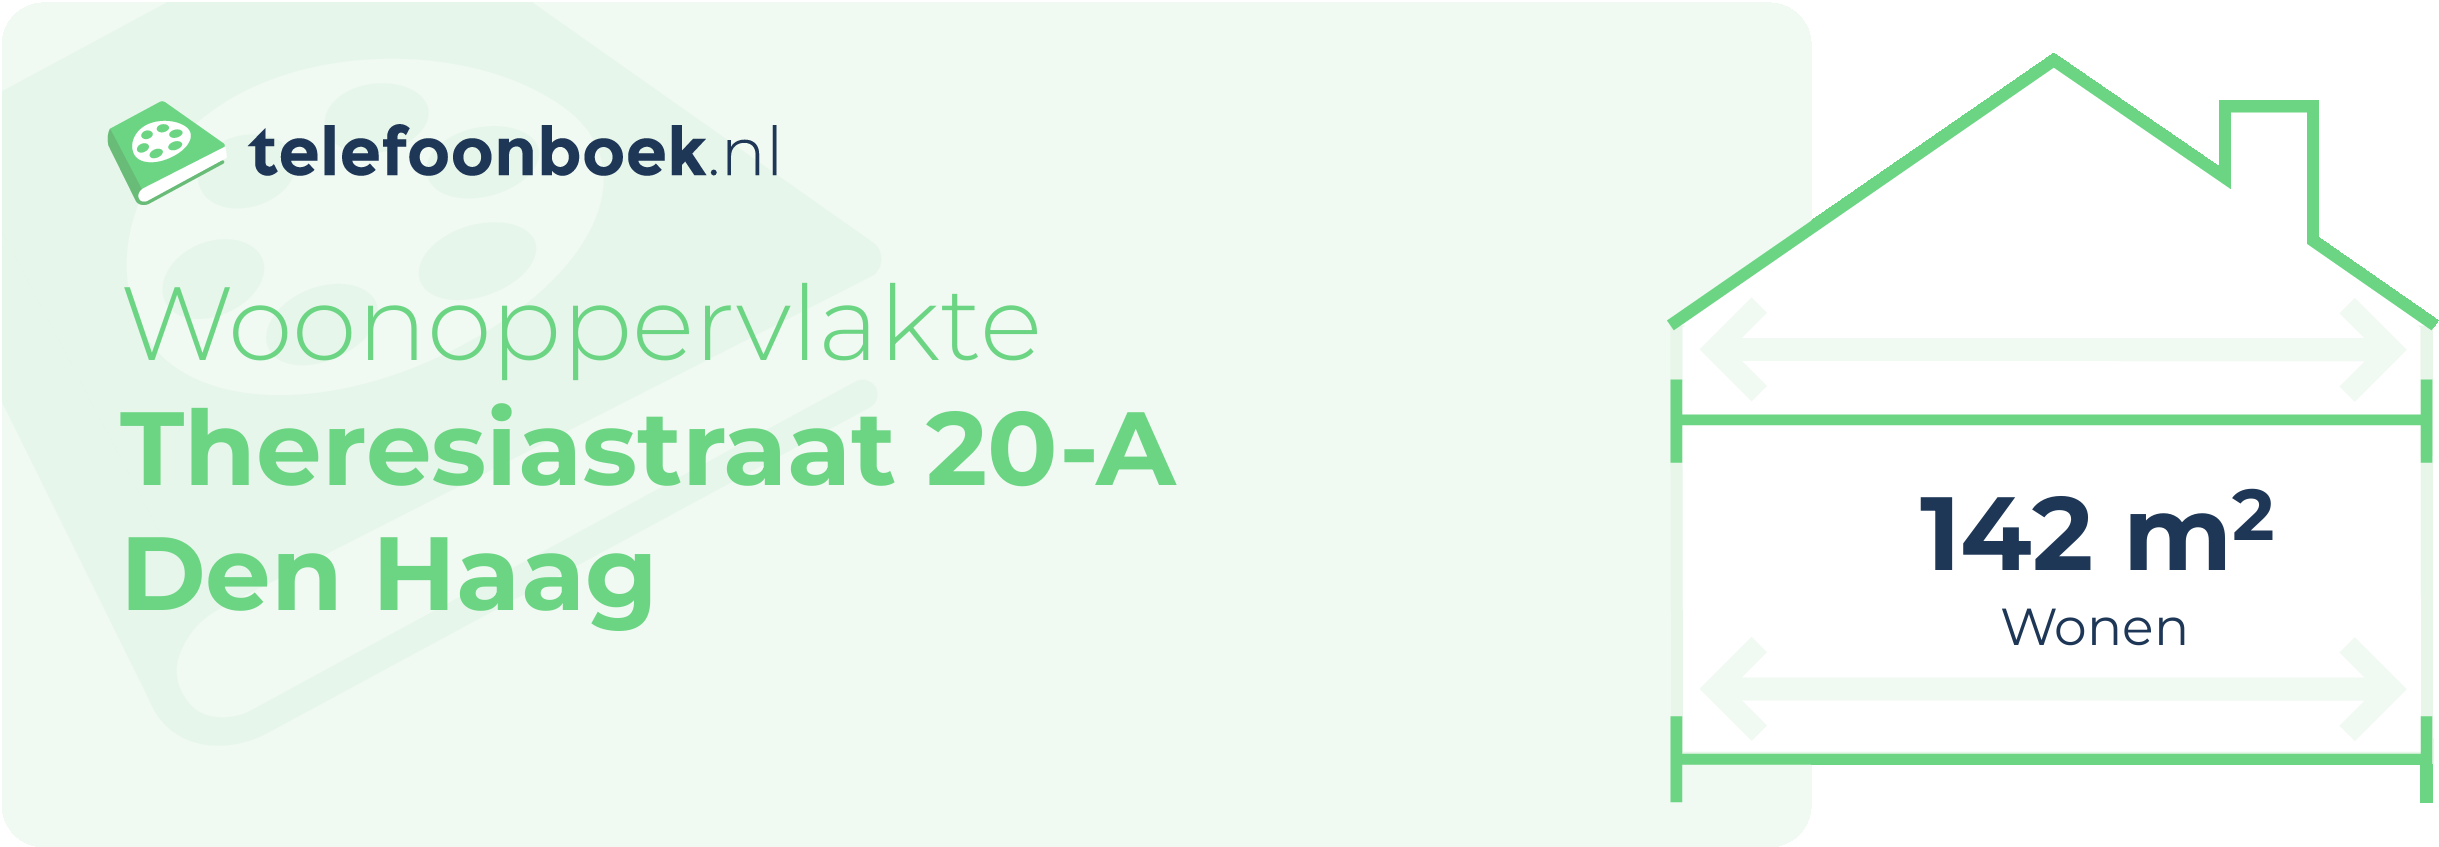 Woonoppervlakte Theresiastraat 20-A Den Haag